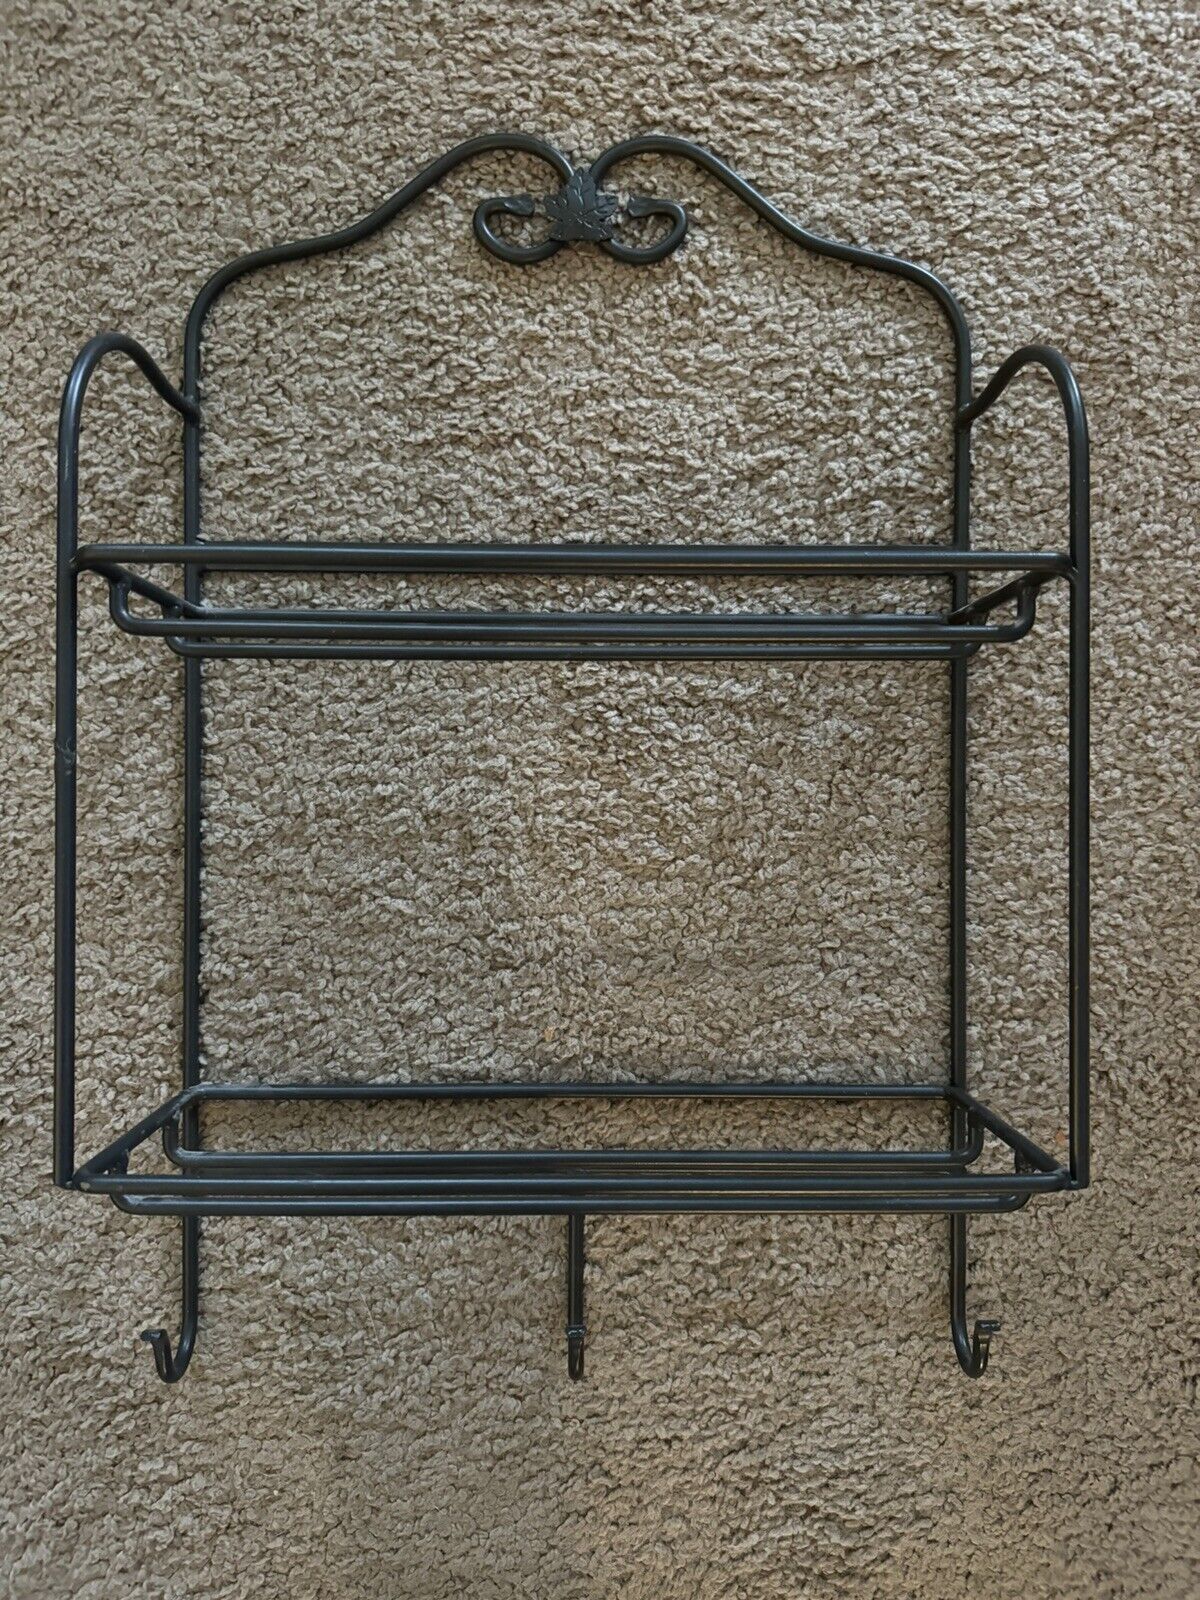 Longaberger Foundry Wrought Iron 2 Tier Rack with 3 Hooks Retired Good Cond